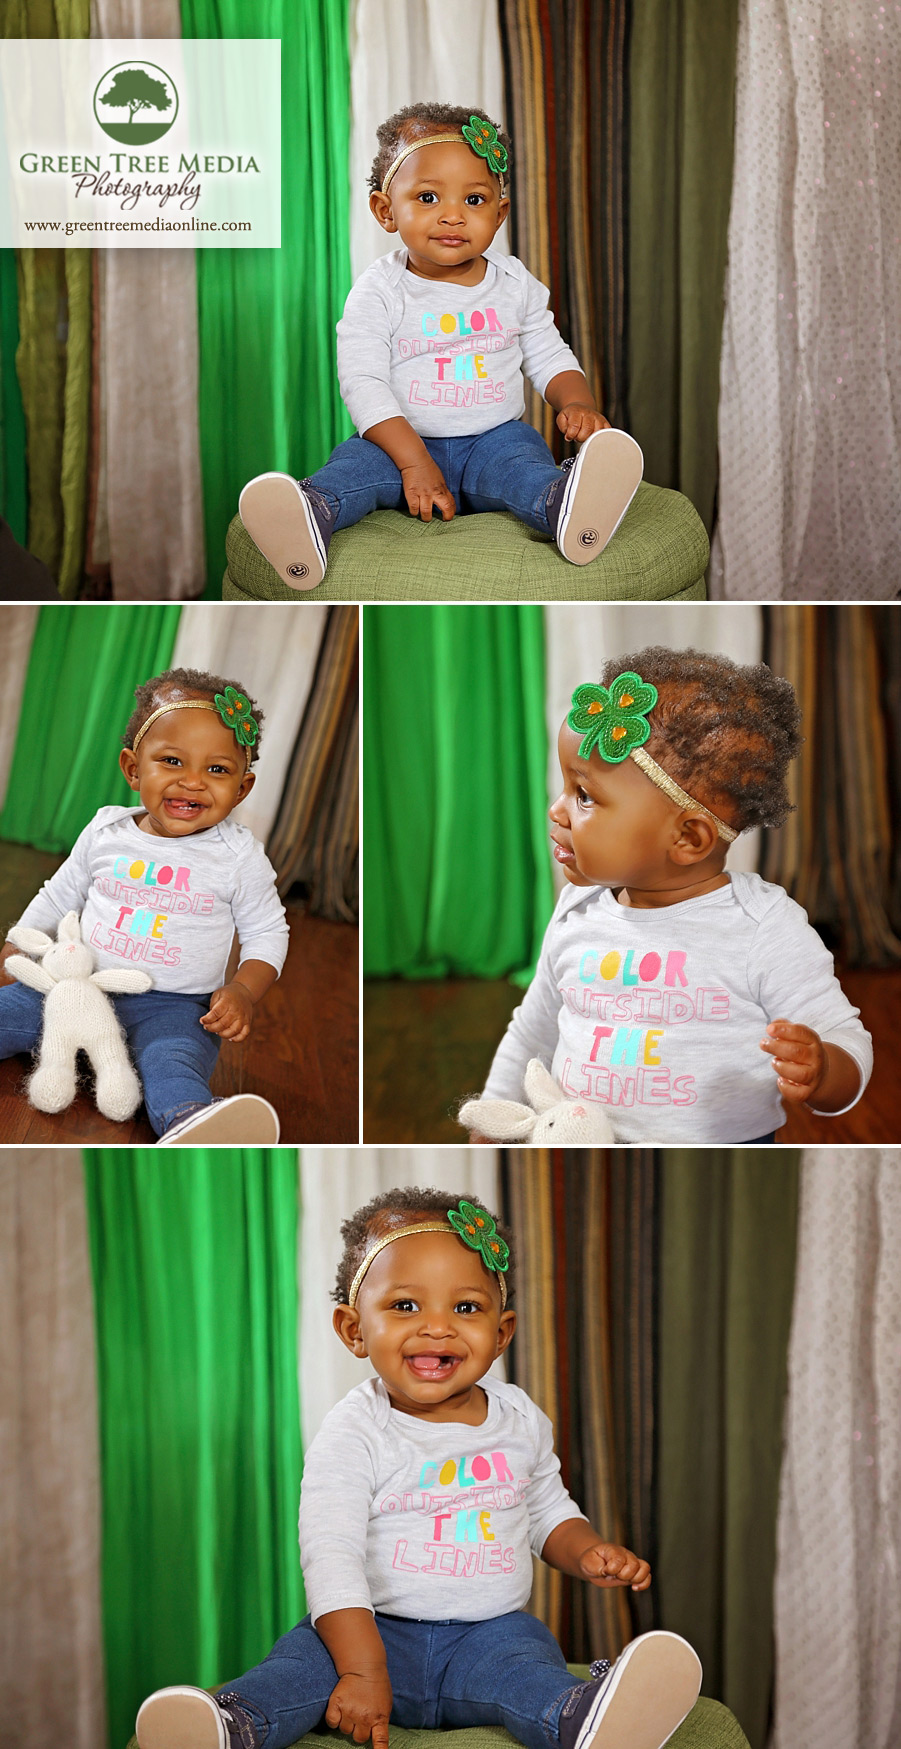 Marlee's 11 Month Session